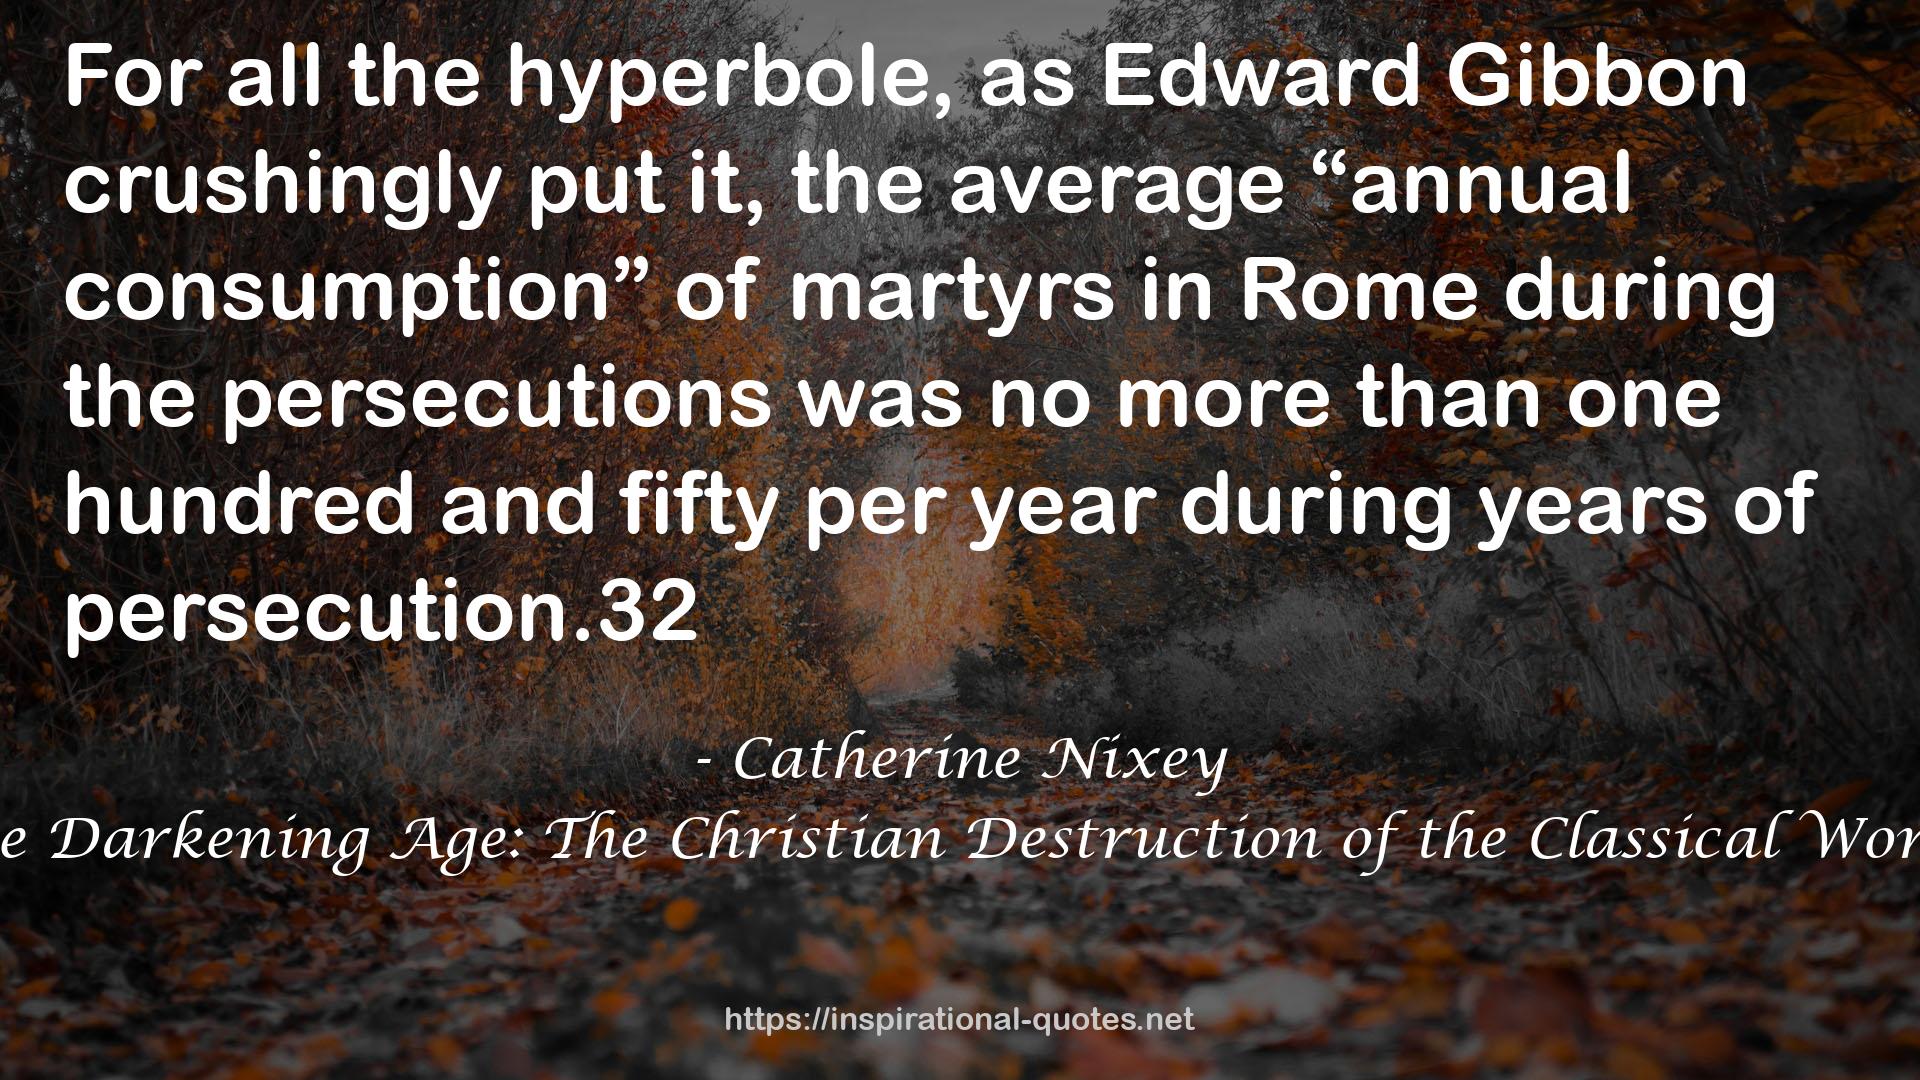 The Darkening Age: The Christian Destruction of the Classical World QUOTES